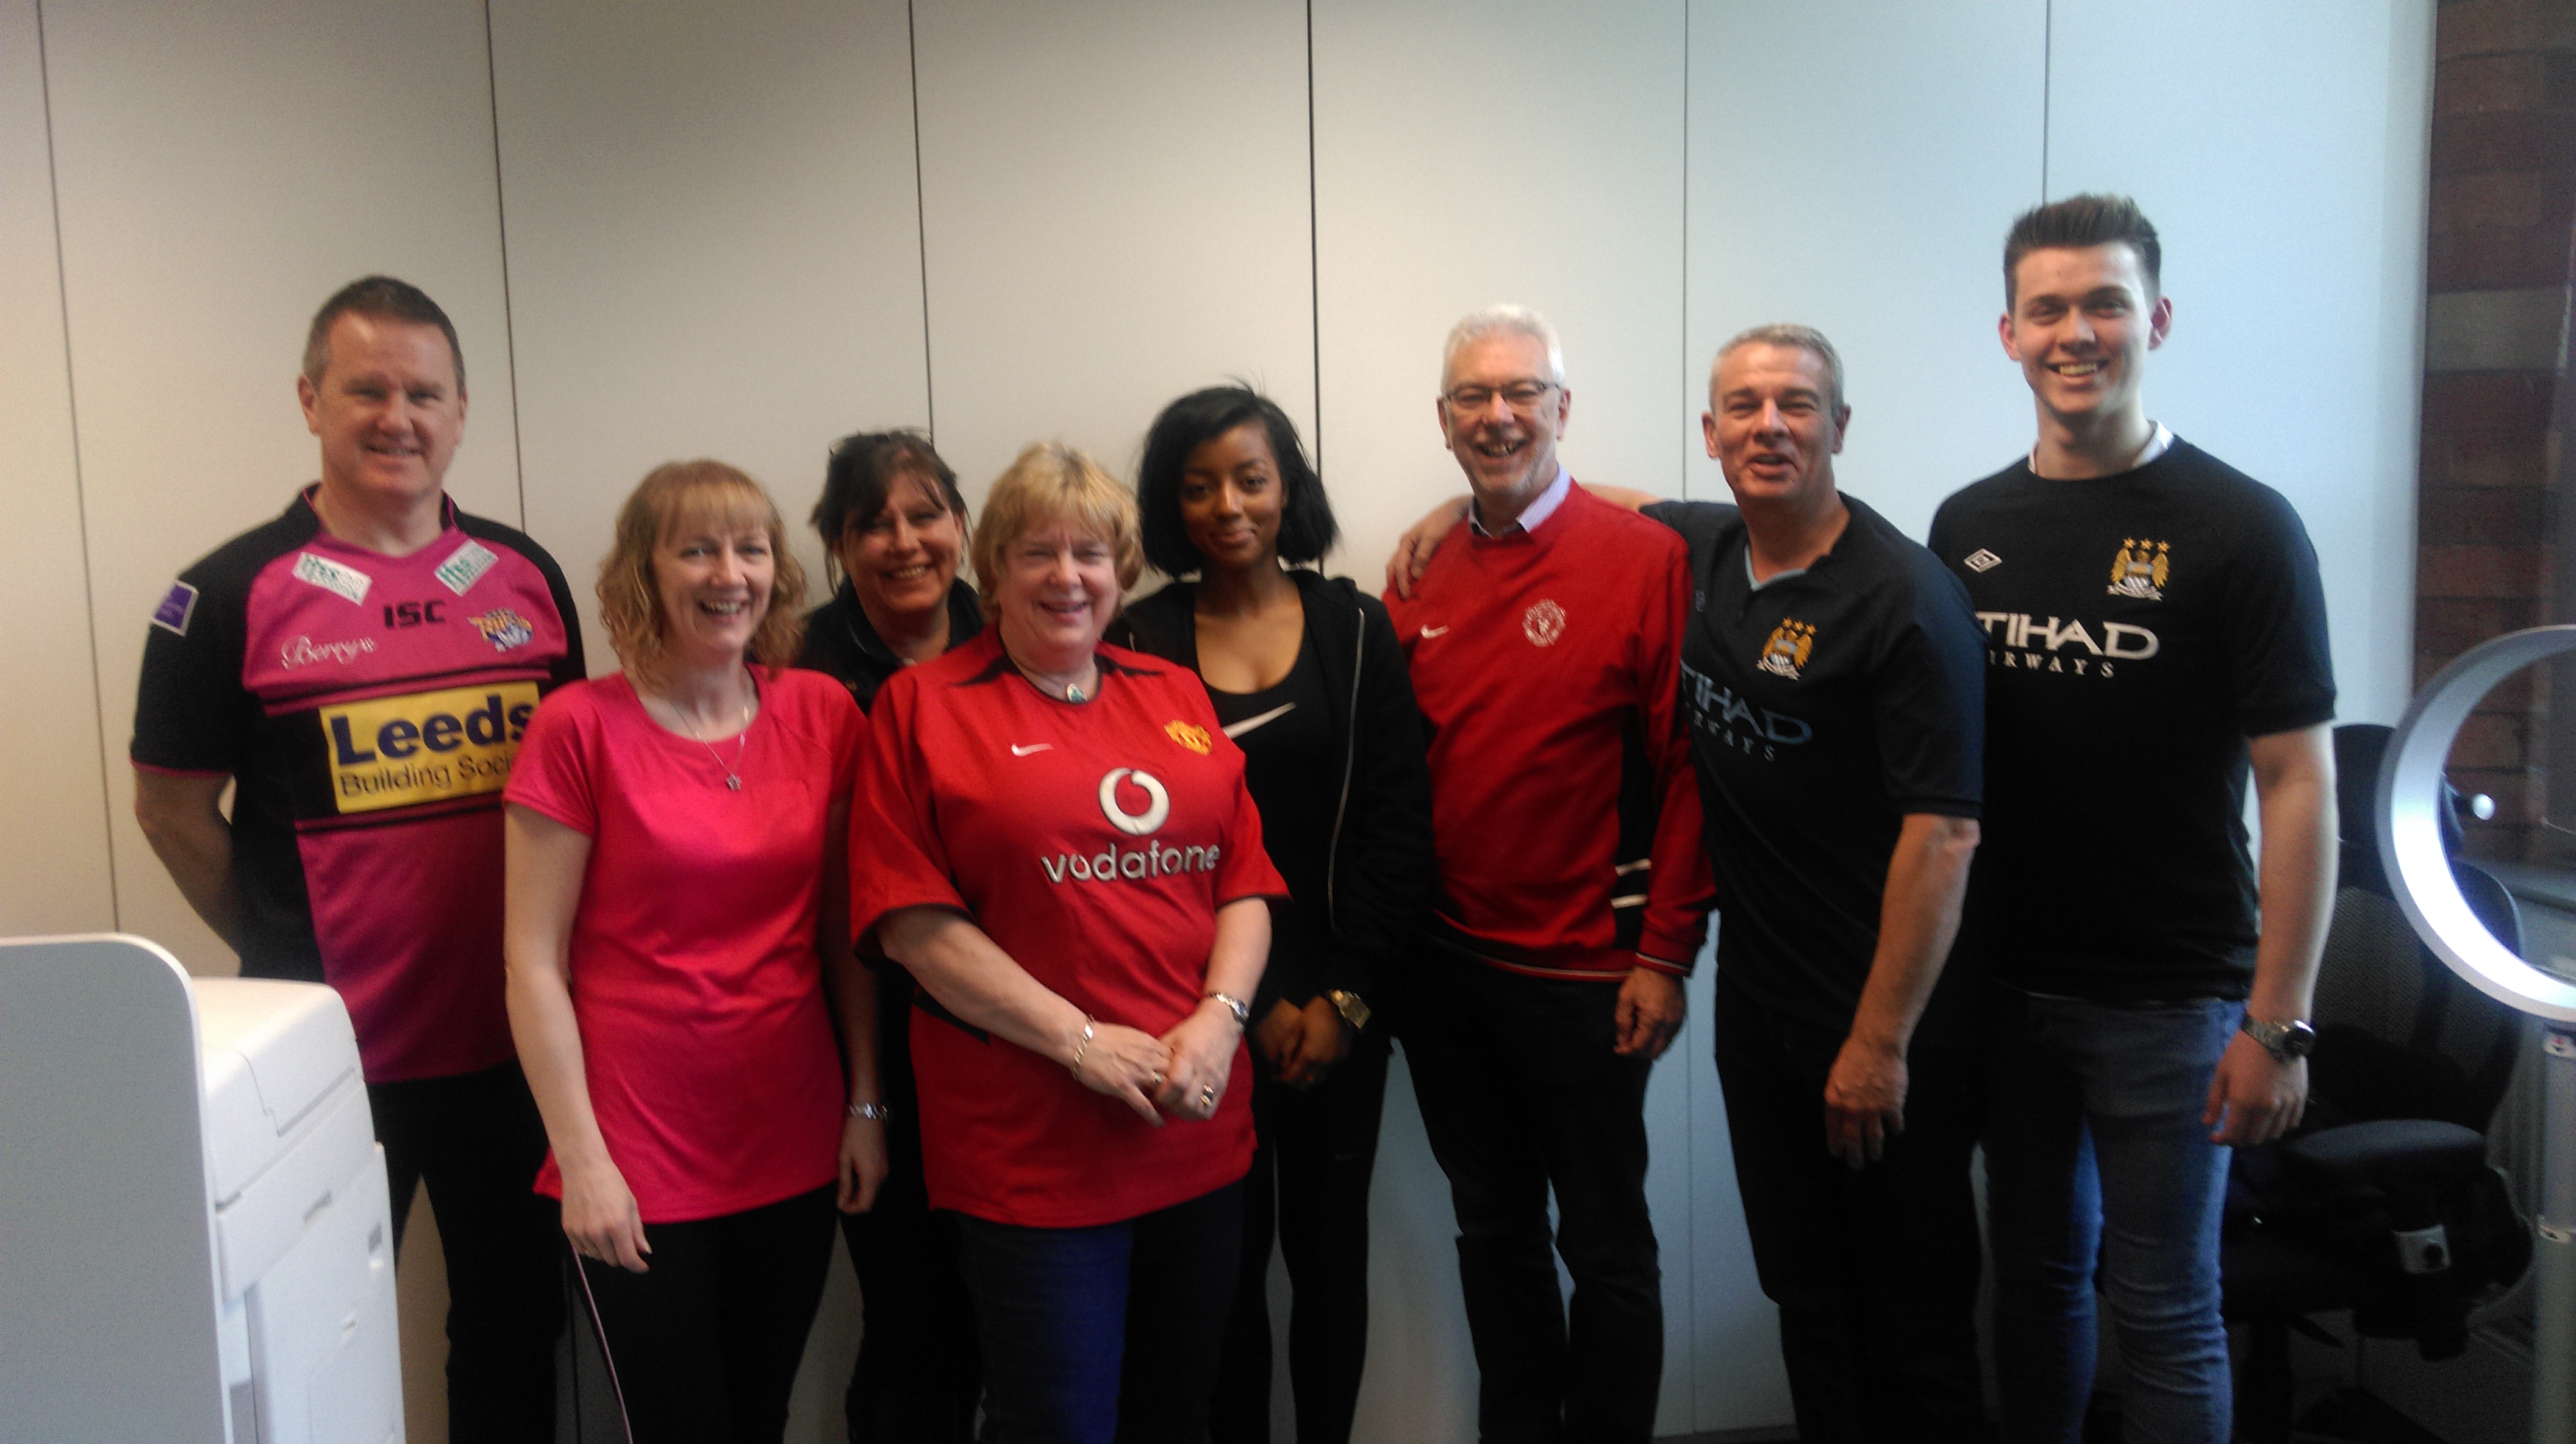 BPIF Northern Team show support for Football Shirt Friday in aid of the Bobby Moore Fund